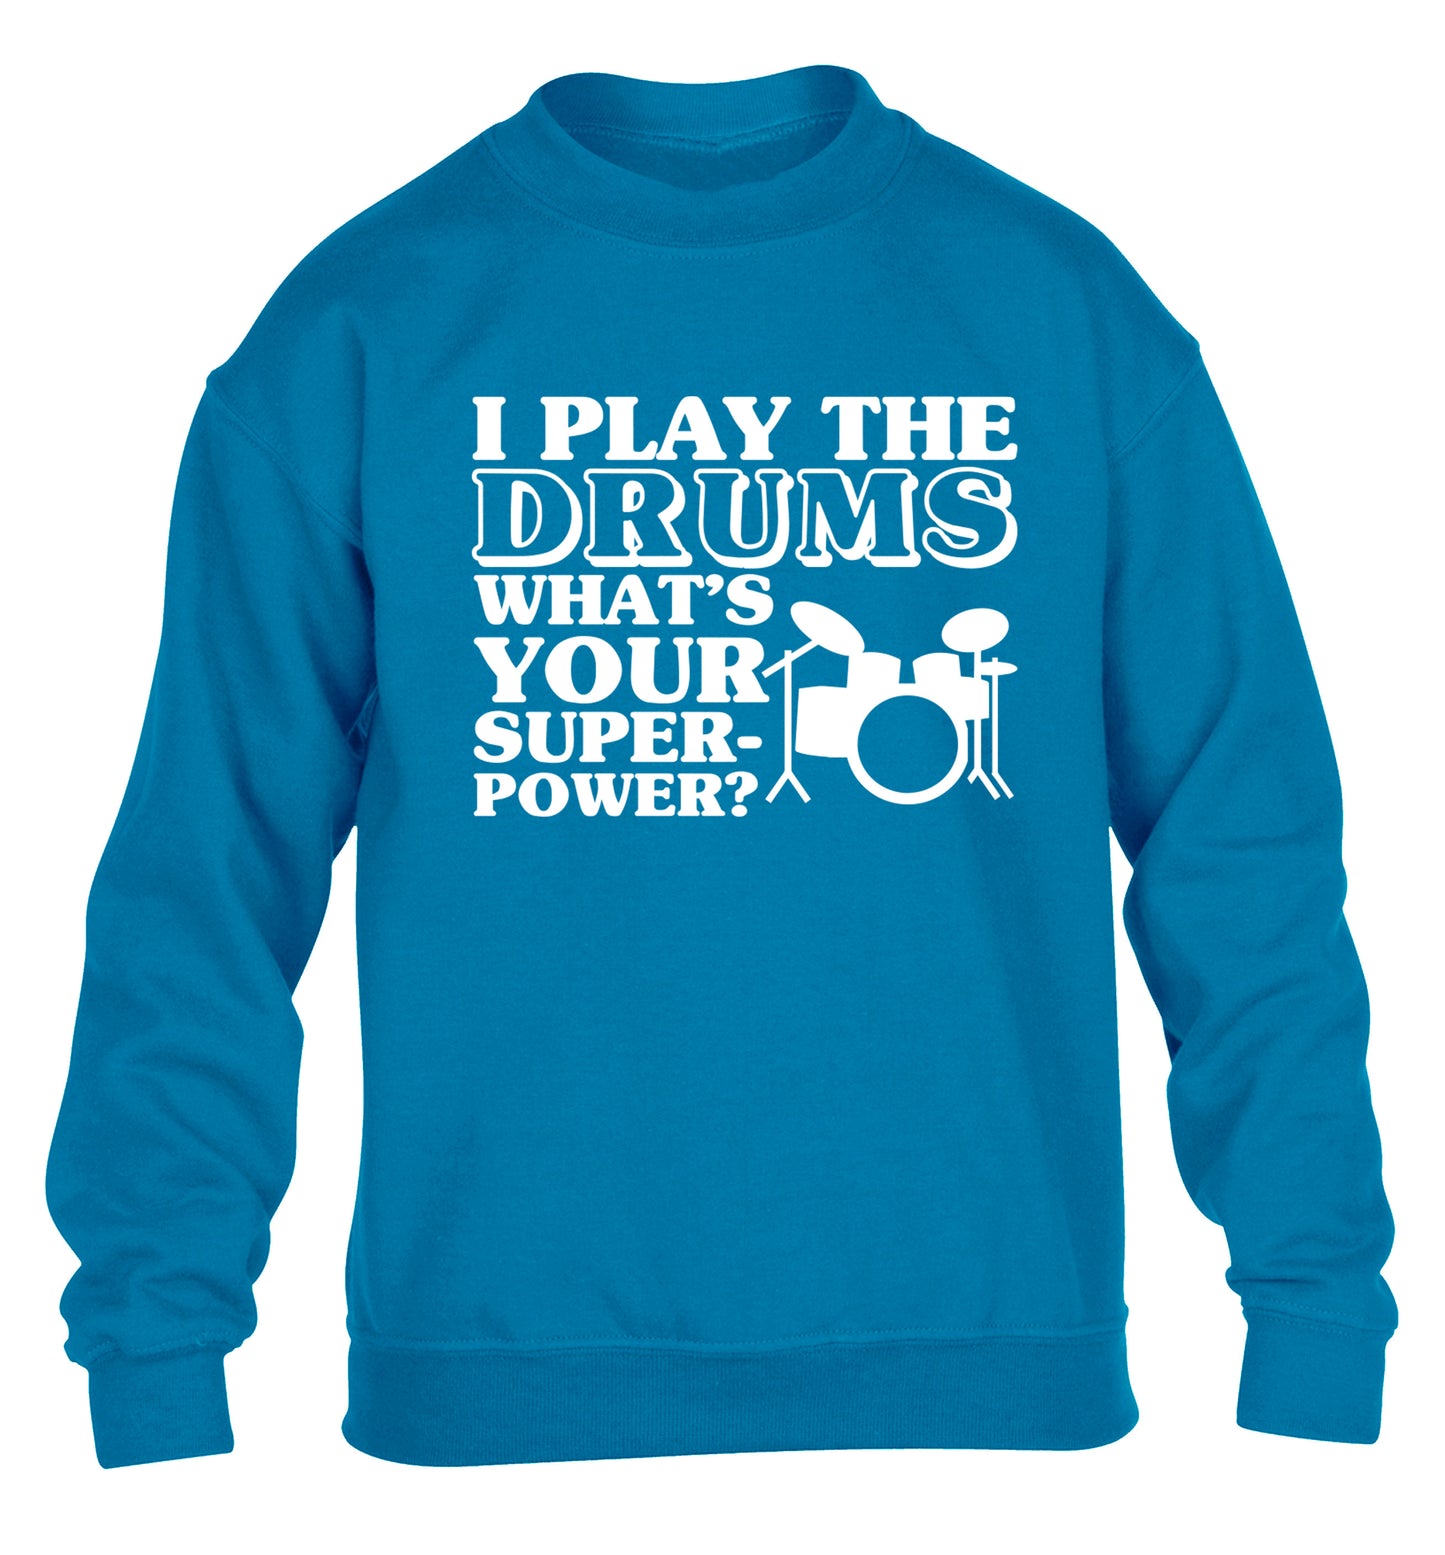 I play the drums what's your superpower? children's blue sweater 12-14 Years